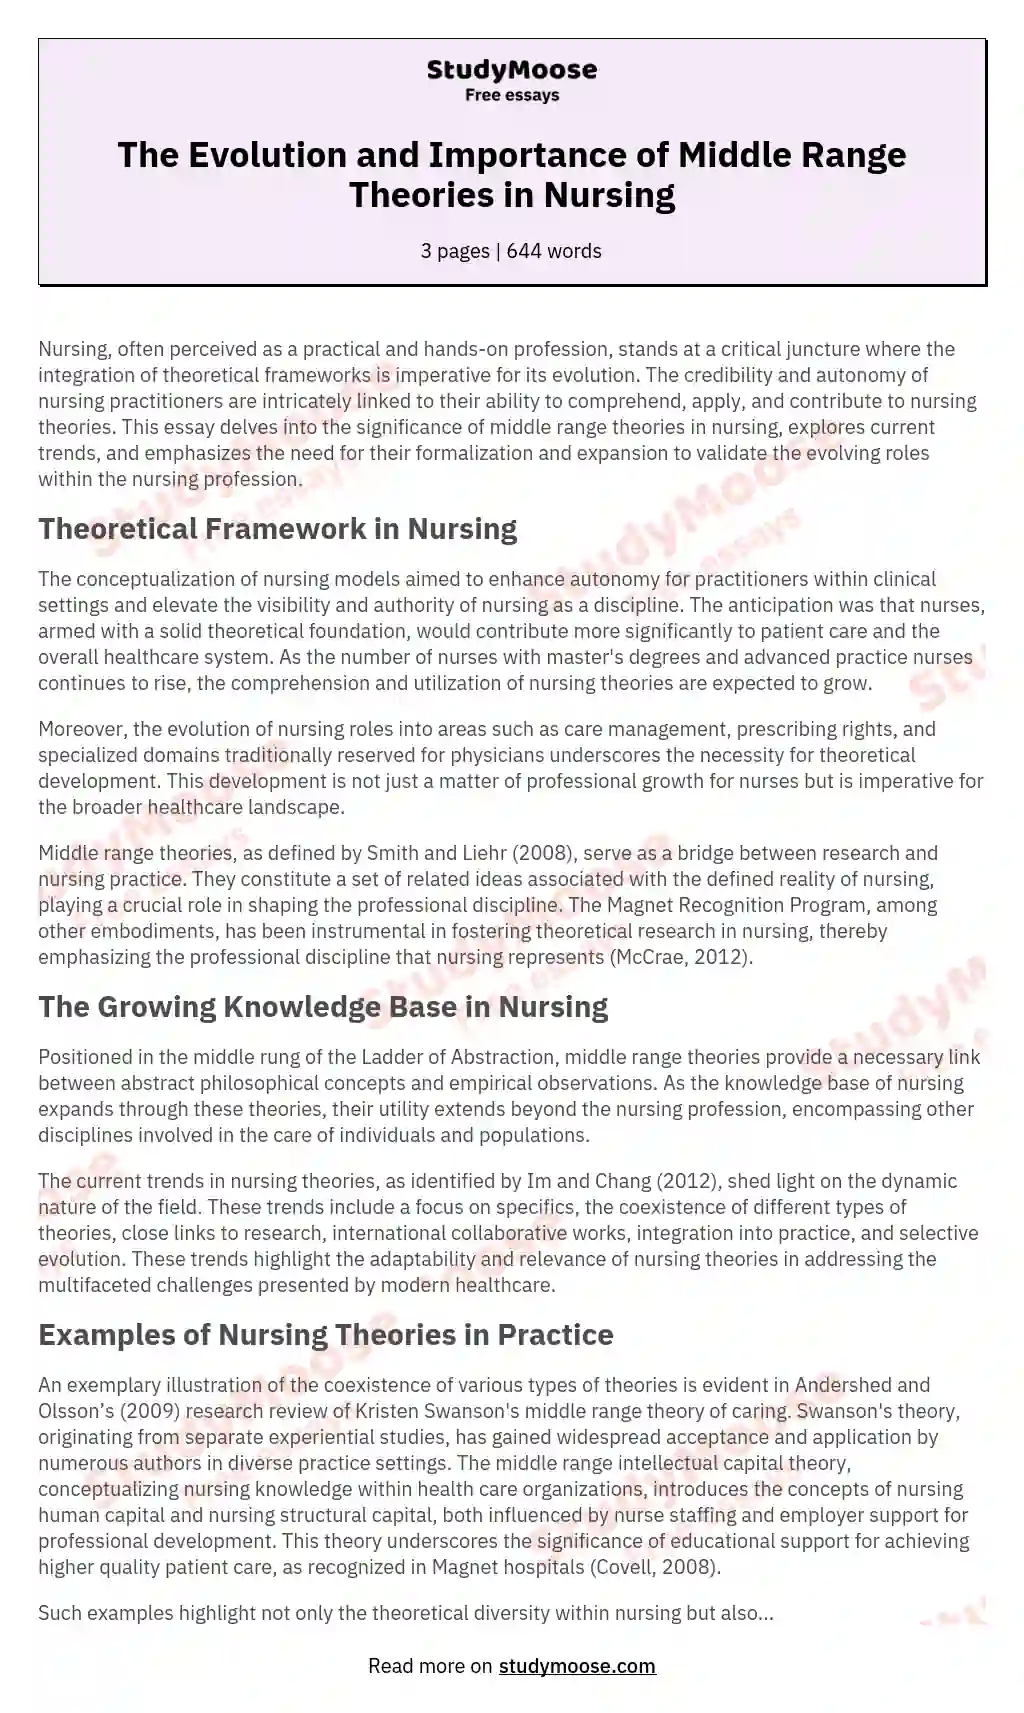 The Evolution and Importance of Middle Range Theories in Nursing essay